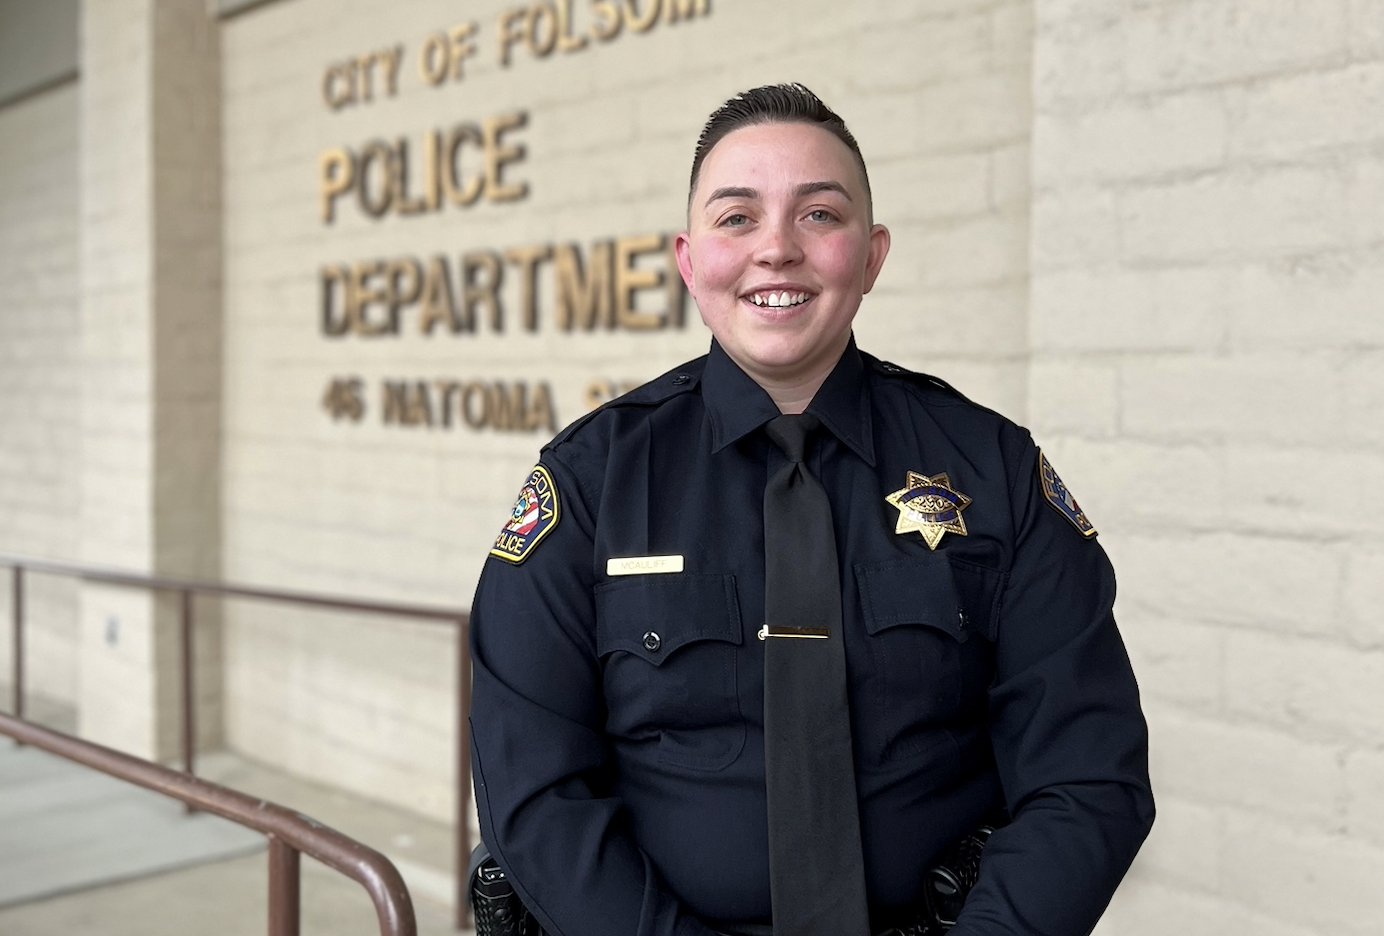 Folsom Police welcomes officer McAuliff to force